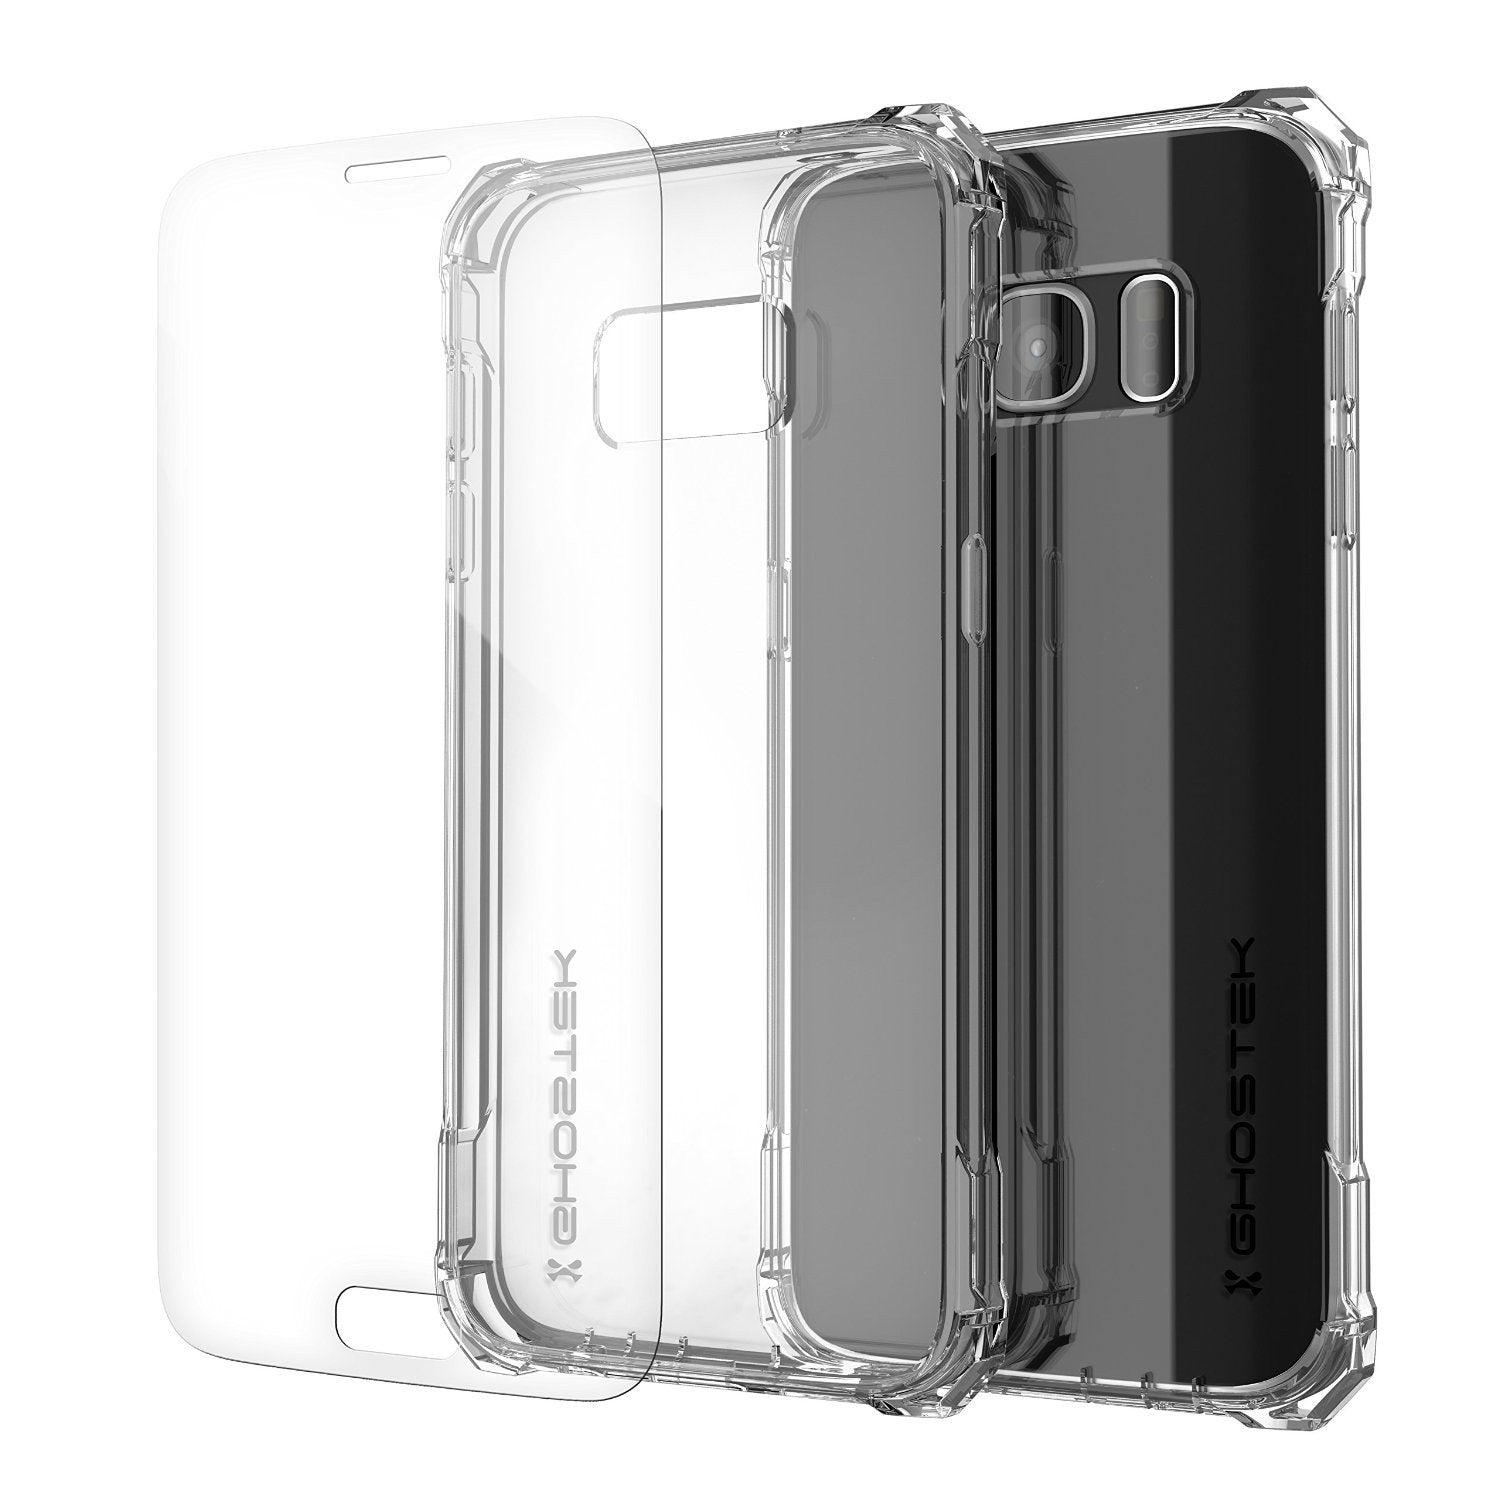 Galaxy S7 Case, Ghostek® Covert Clear Series w/ Premium Impact Cover Screen Protector | Warranty